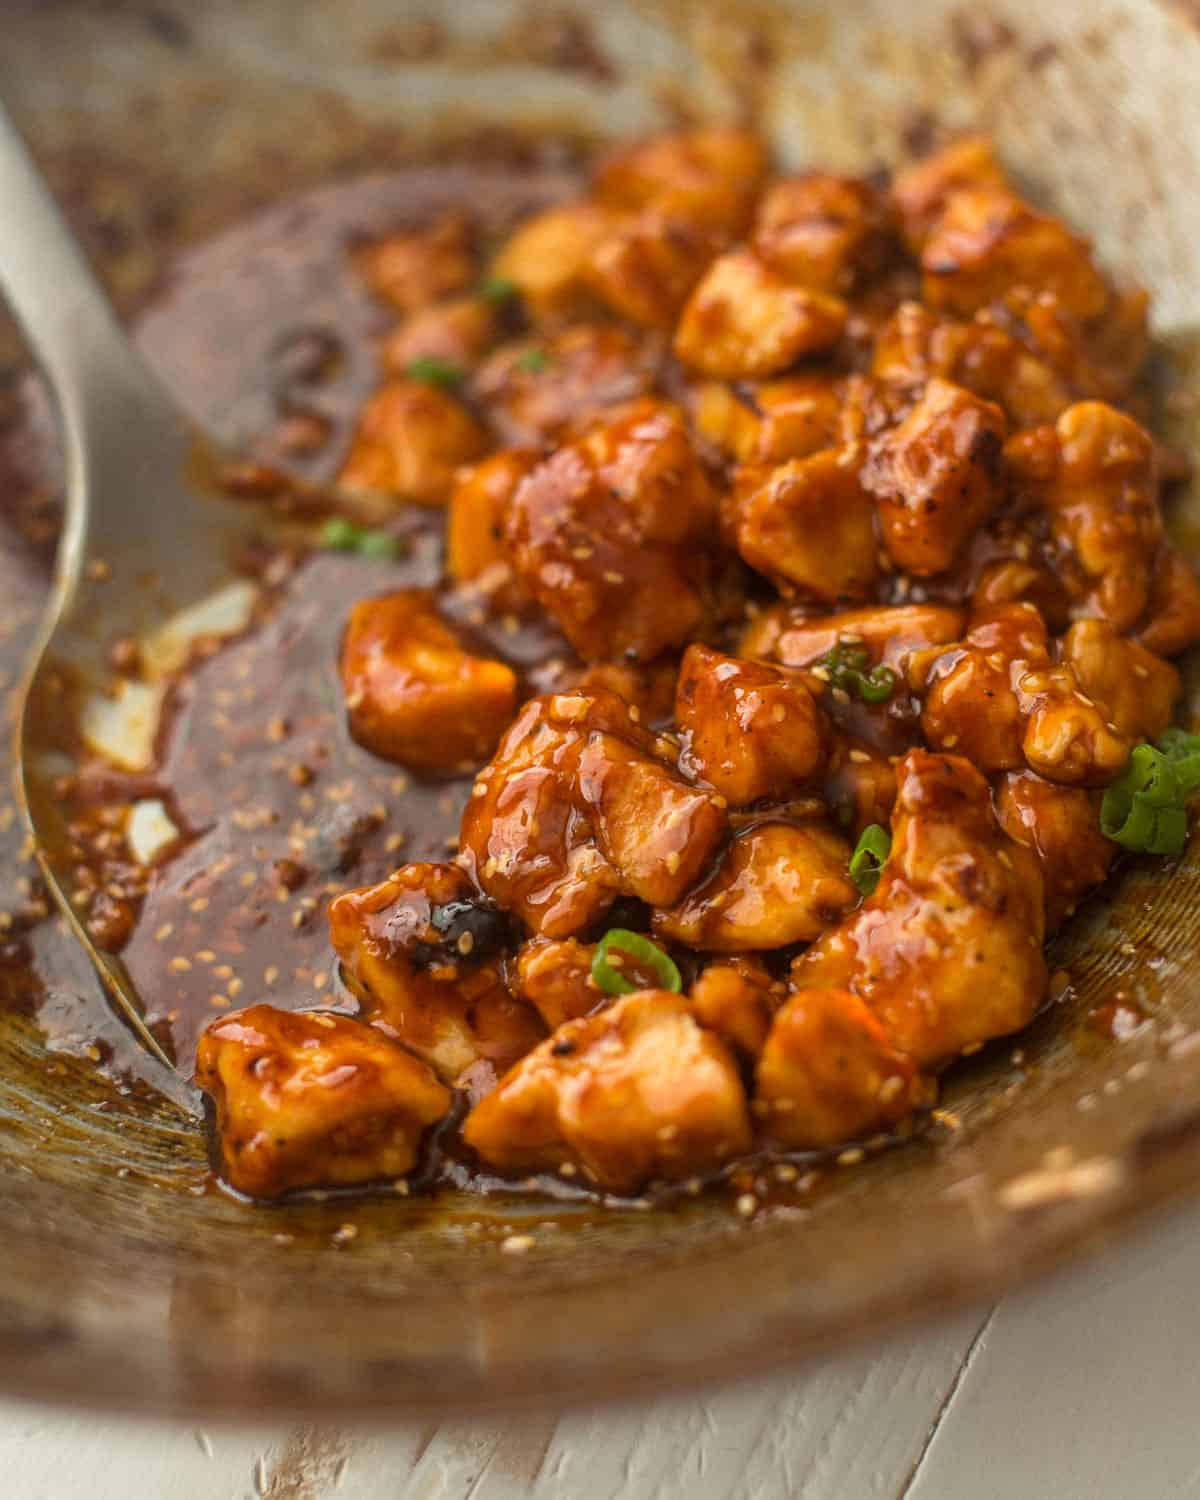 tossing sauce with chicken in a wok